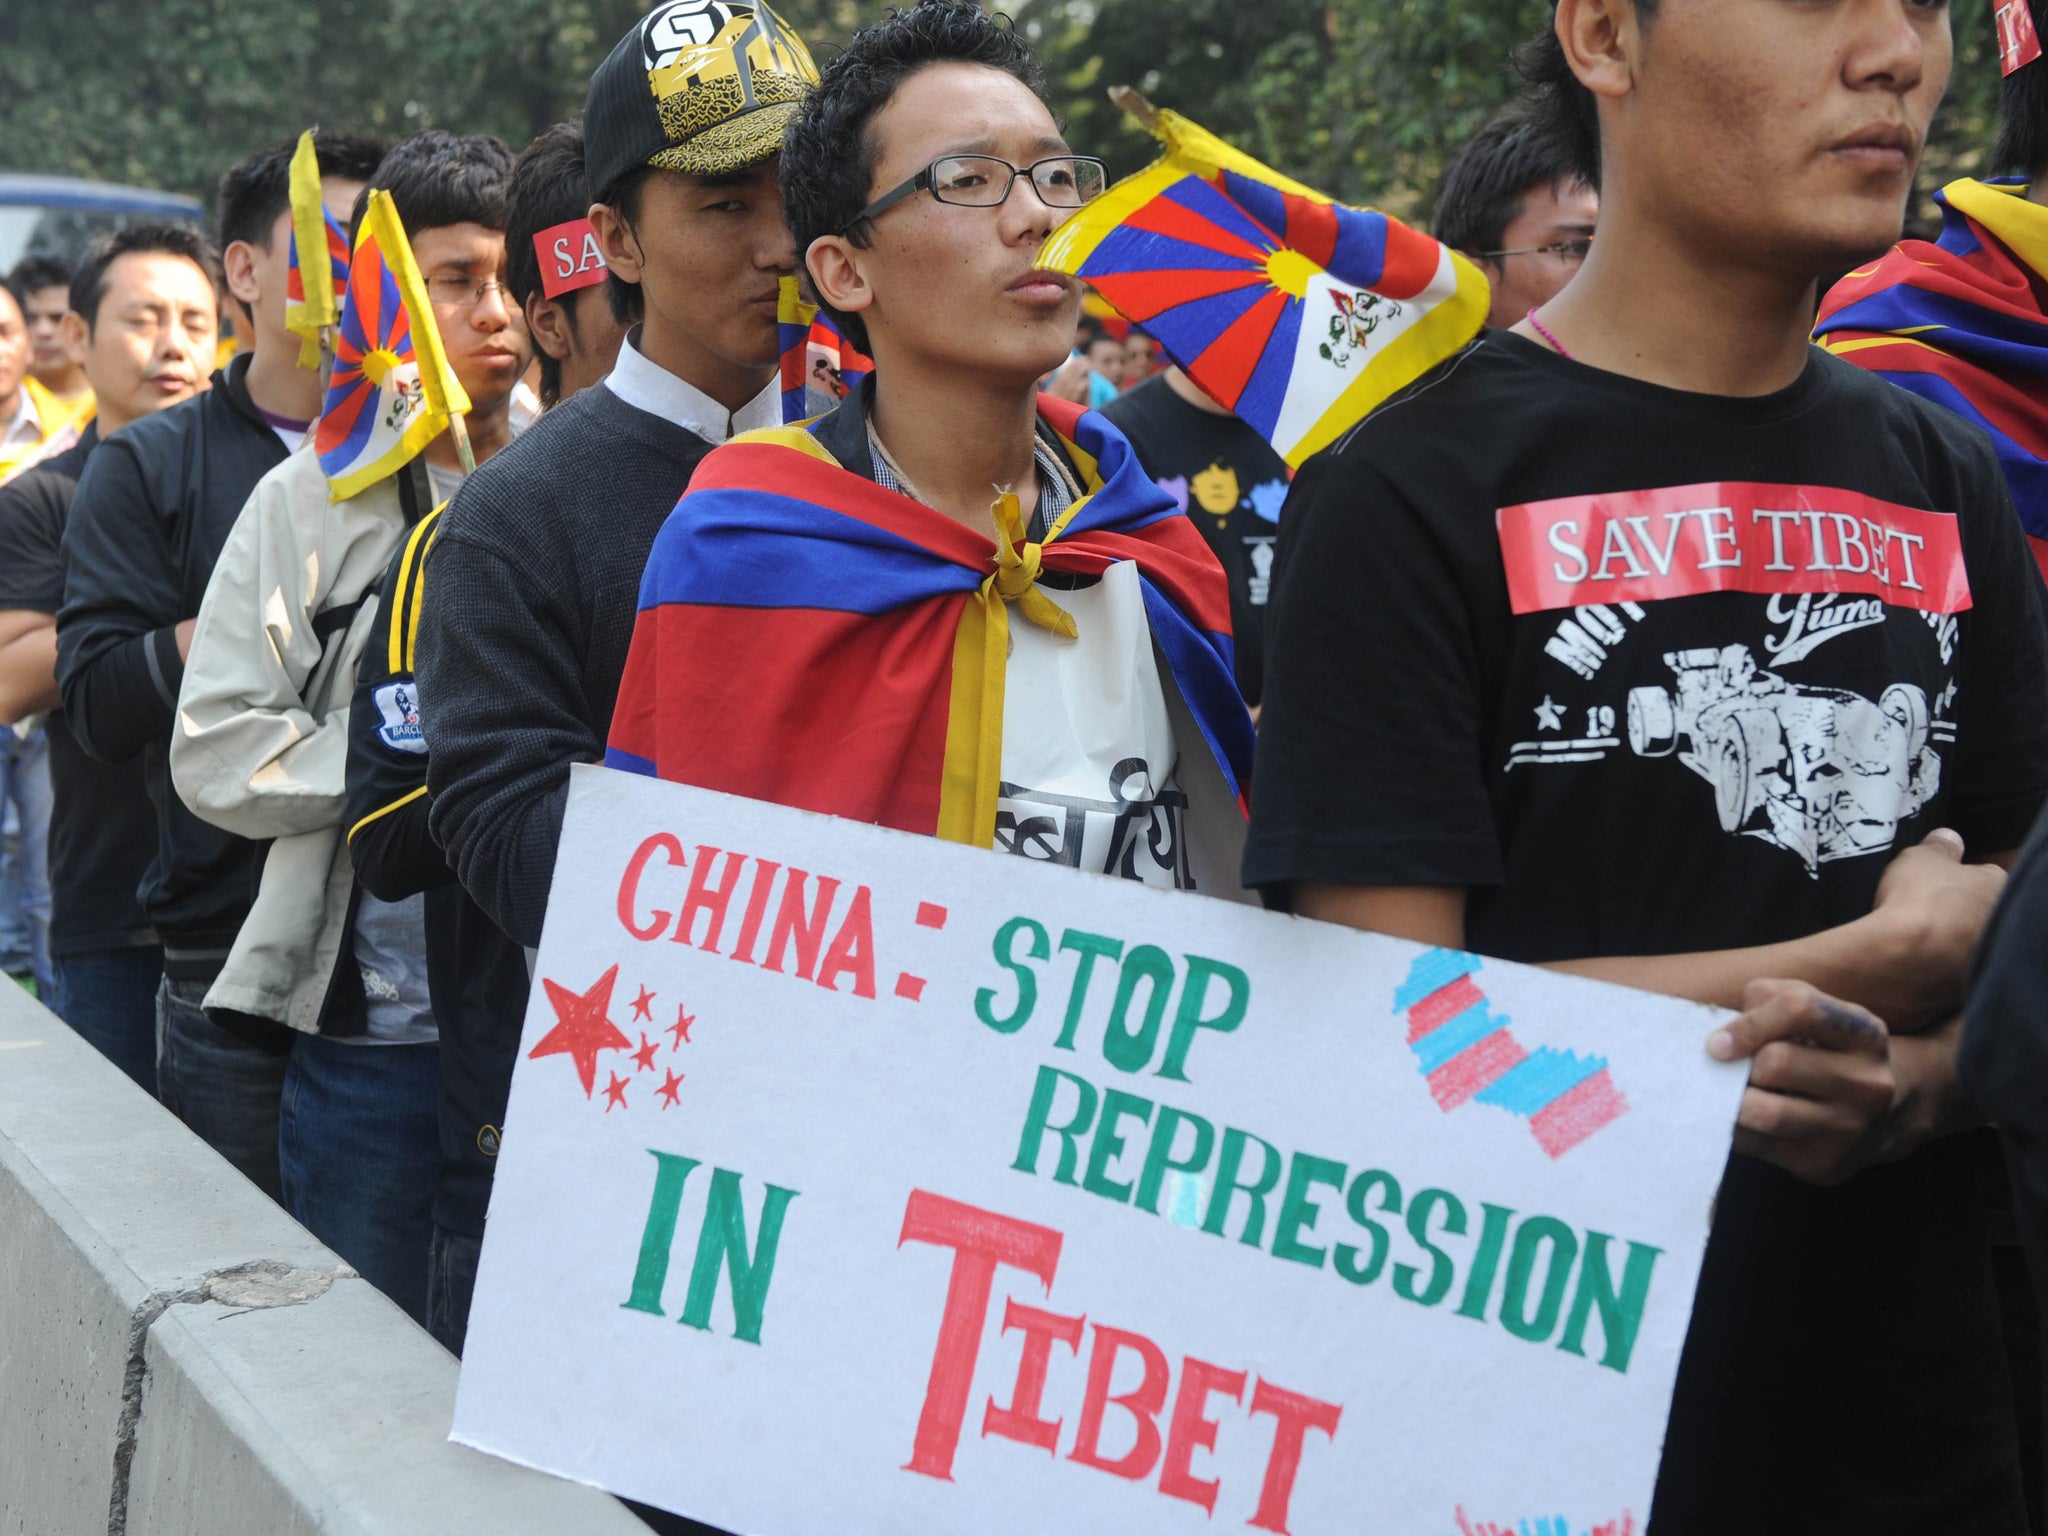 Tibetan protesters march during a Tibetan people's solidarity movement rally near the Chinese embassy in New Delhi on November 16, 2011. Around 500 Tibetans marched close to the Chinese embassy to denounce Chinese rule in Tibet. In China, at least five monks and two nuns have died in a wave of self-immolation protests, rights groups say, with the most recent death being reported a week ago when a nun set fire to herself in Sichuan province. AFP PHOTO/ RAVEENDRAN